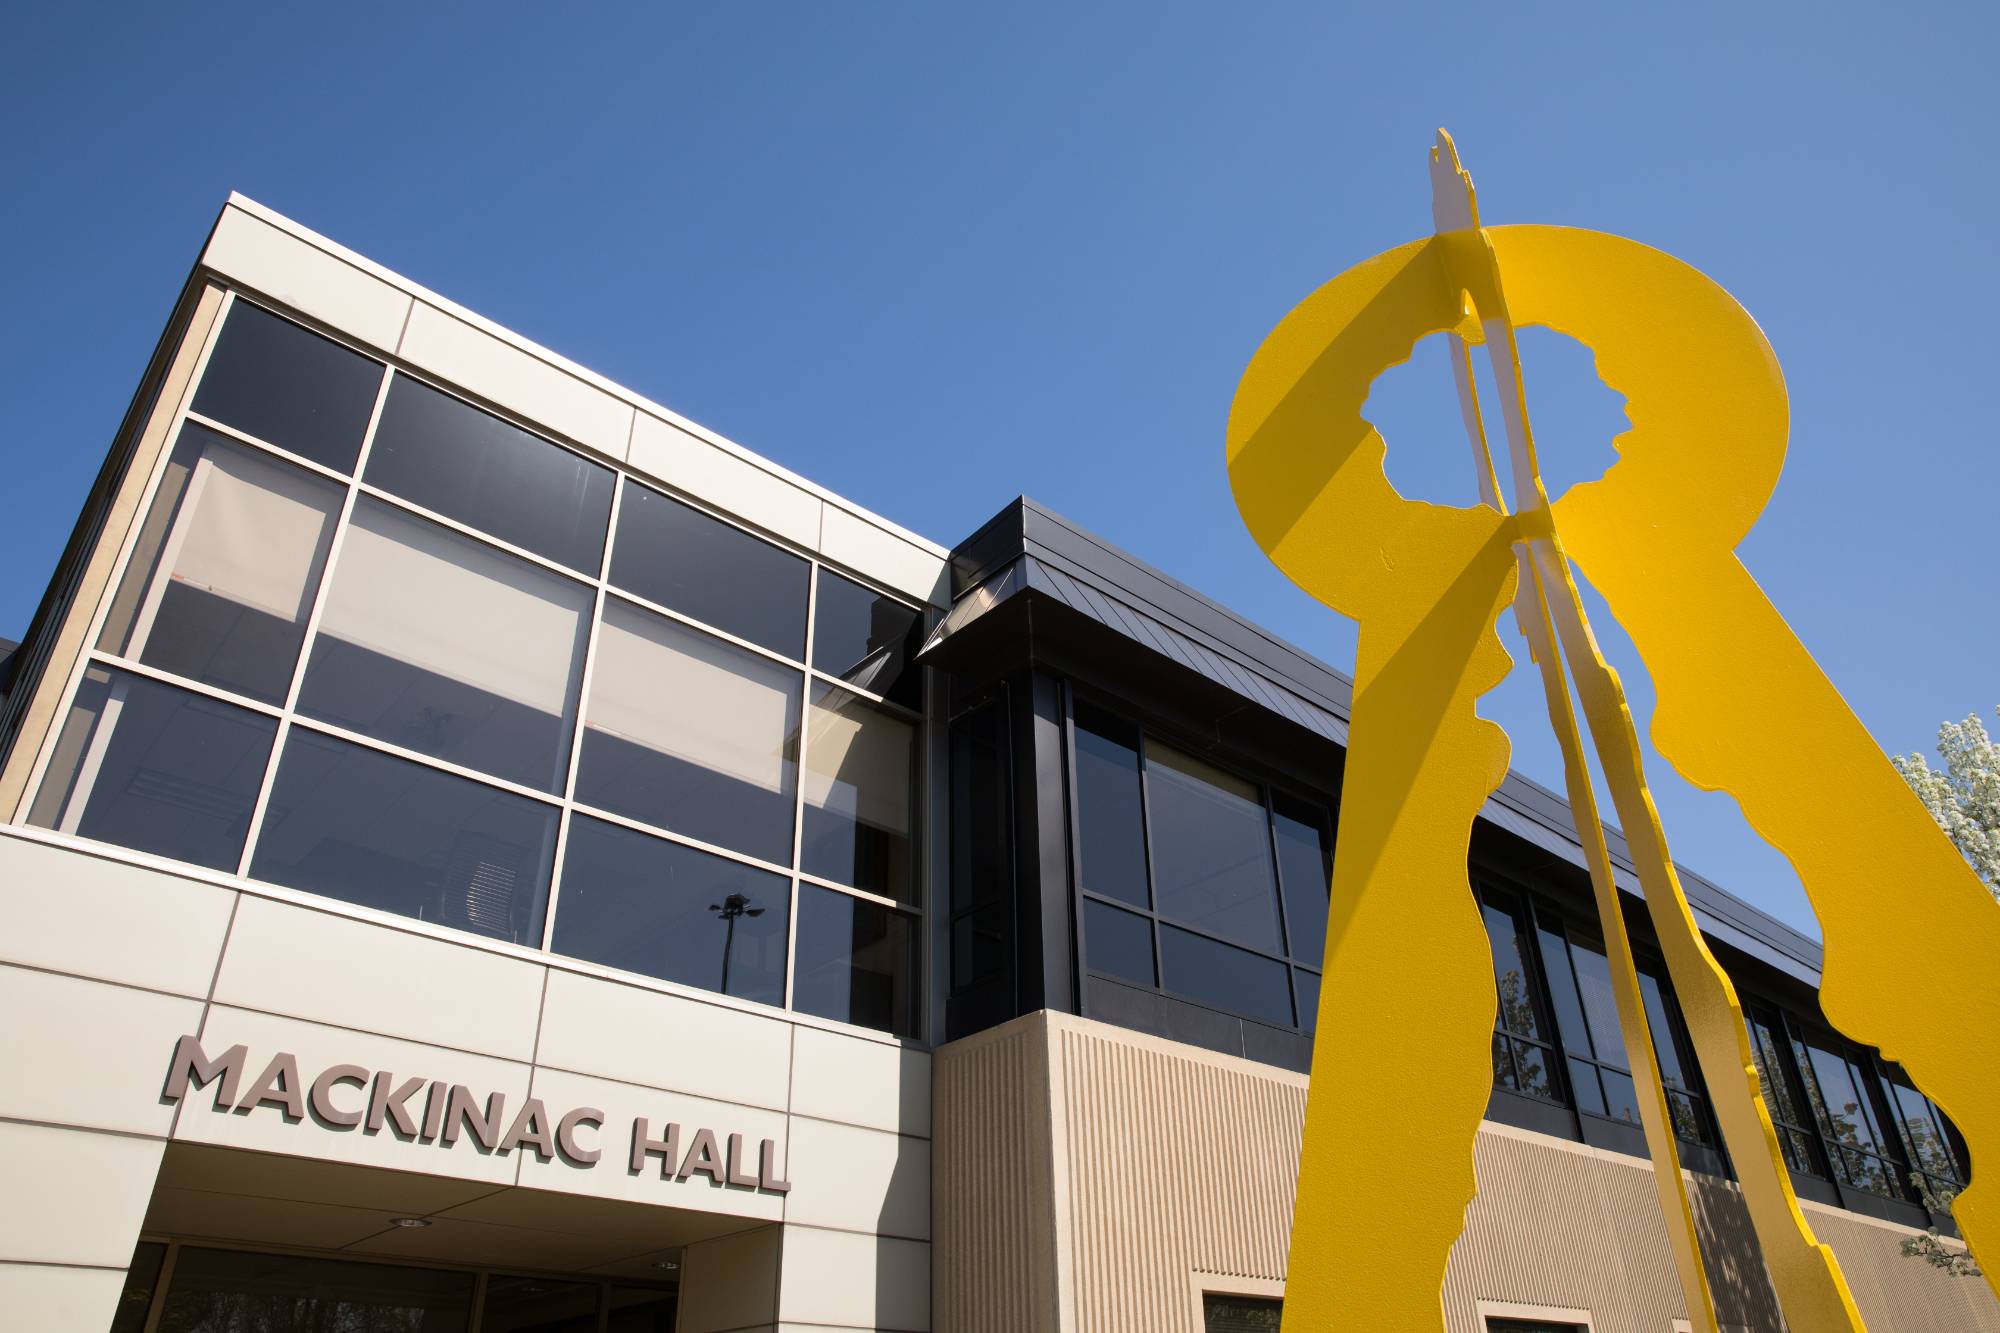 The front of Mackinac Hall and a metal yellow sculpture